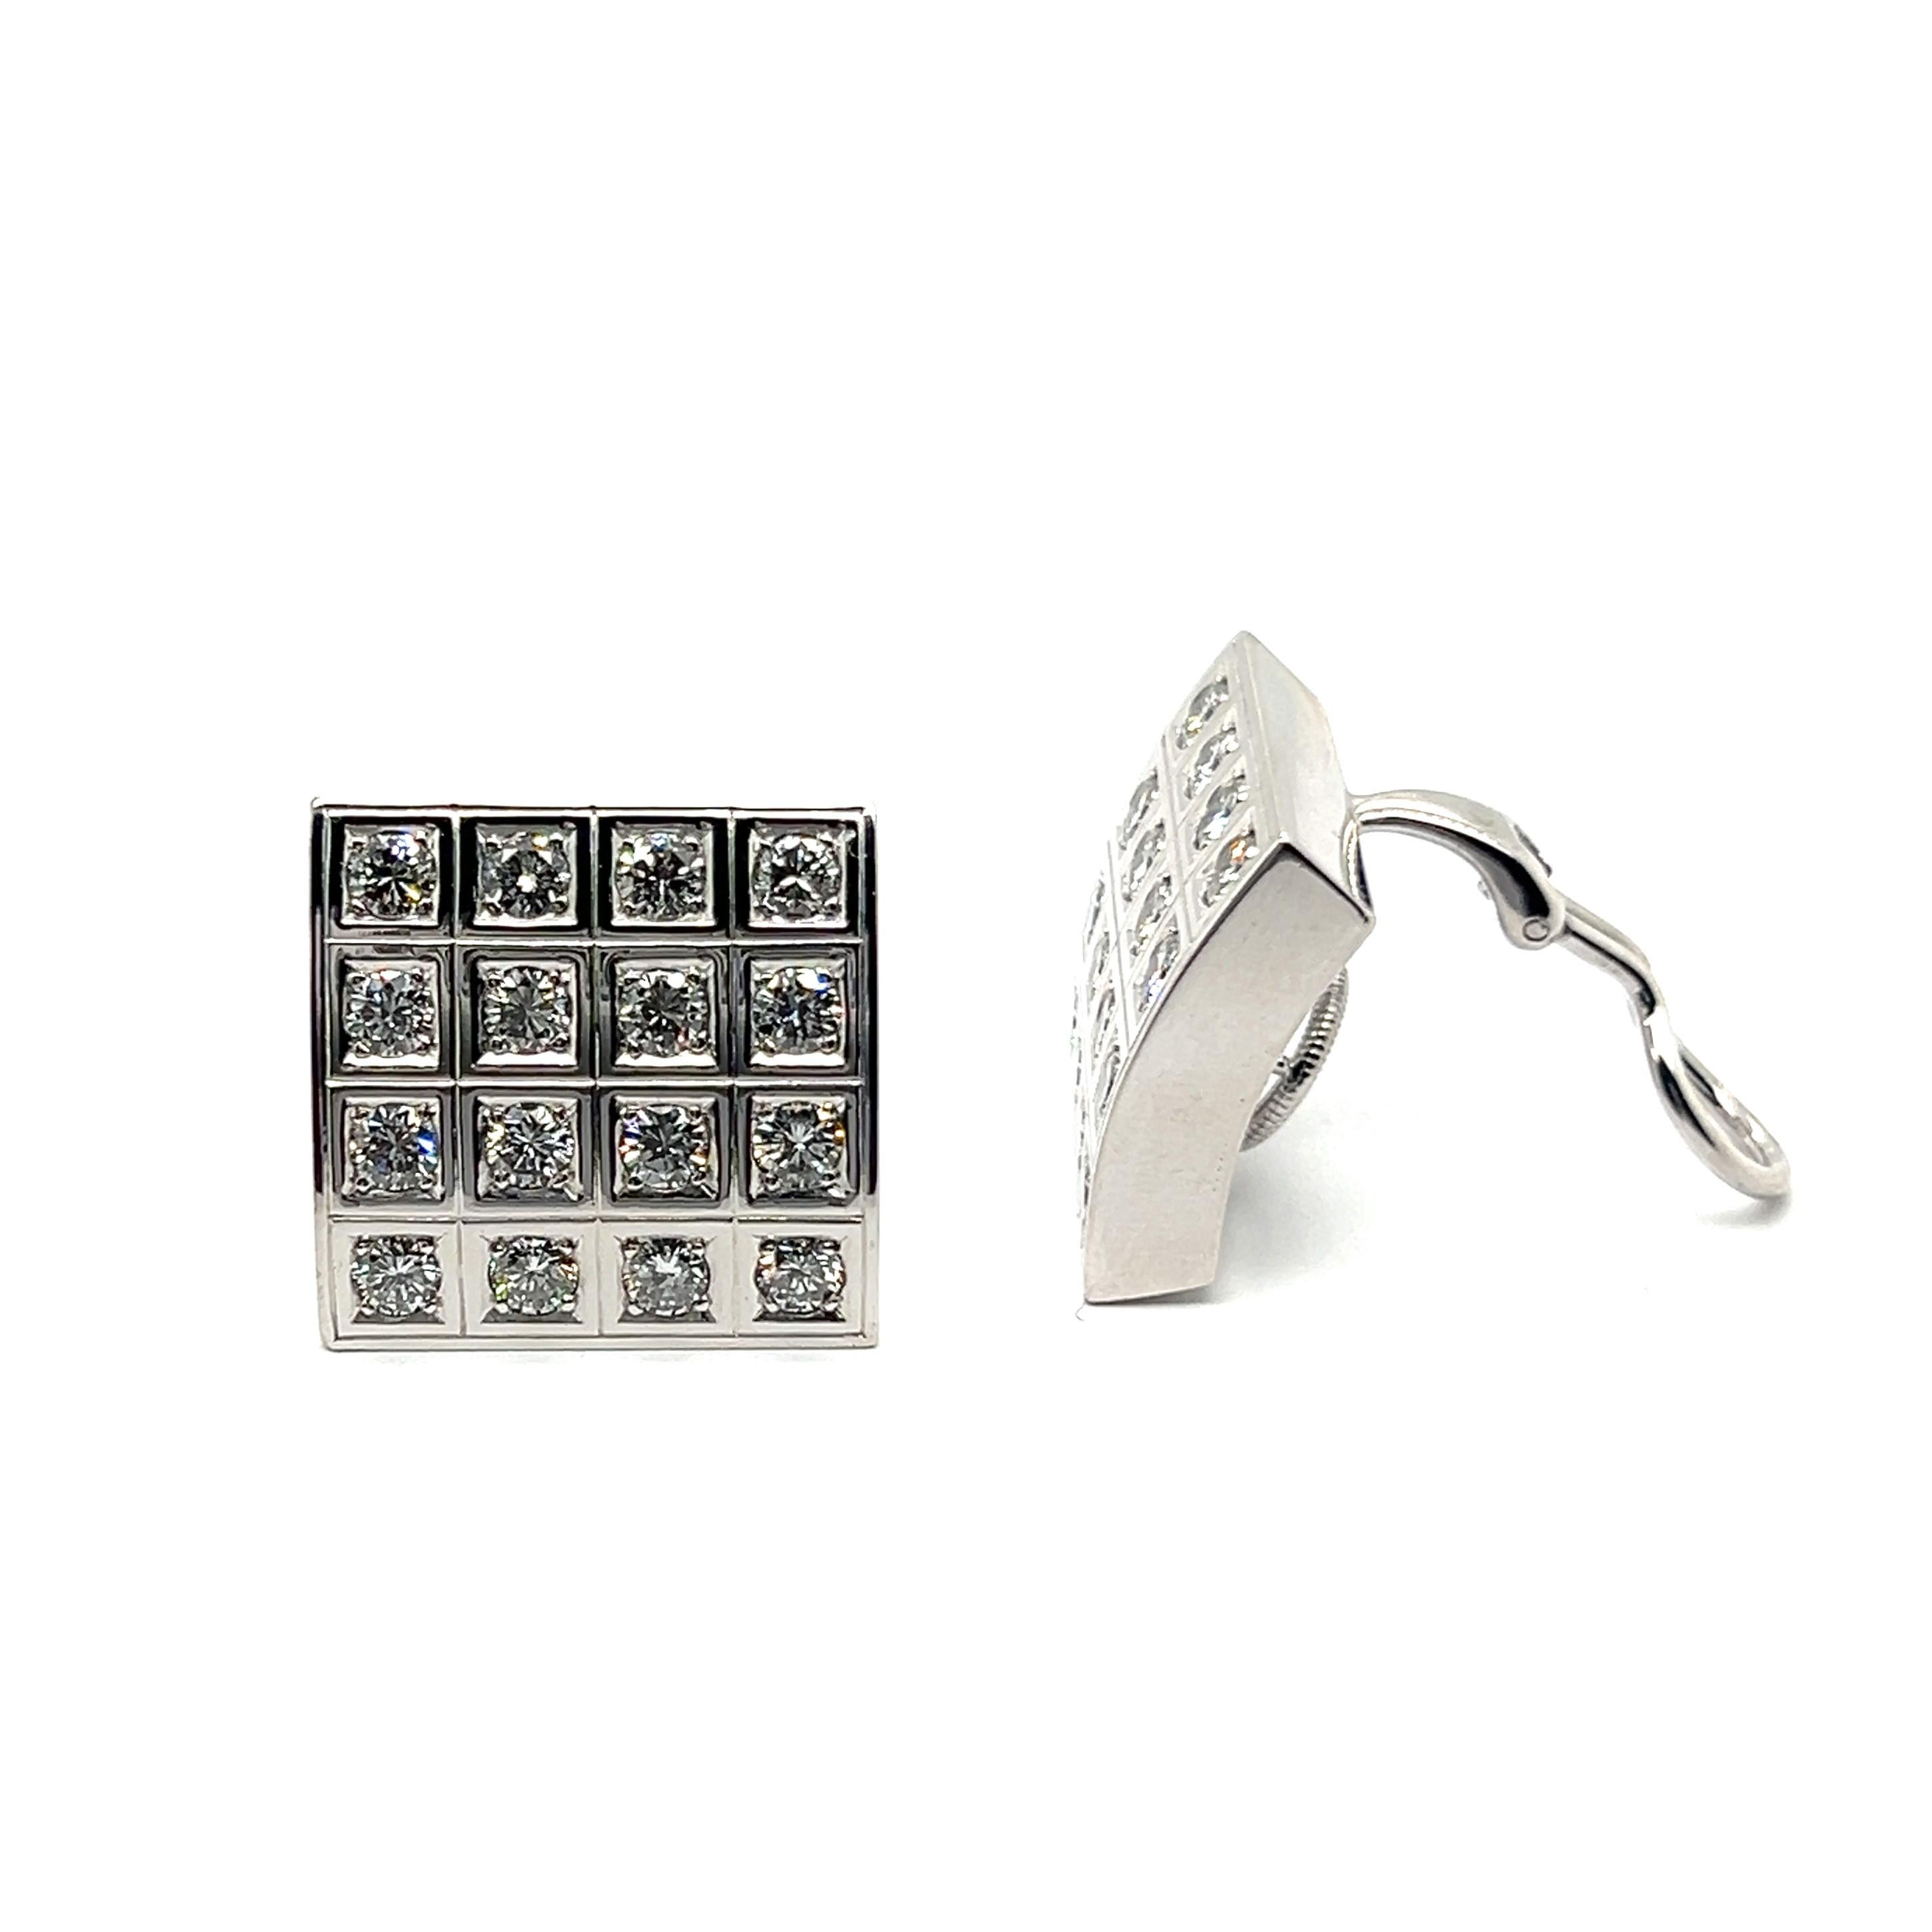  Bold Graphic Earrings with Diamonds in 18 Karat White Gold by Majo Fruithof For Sale 7